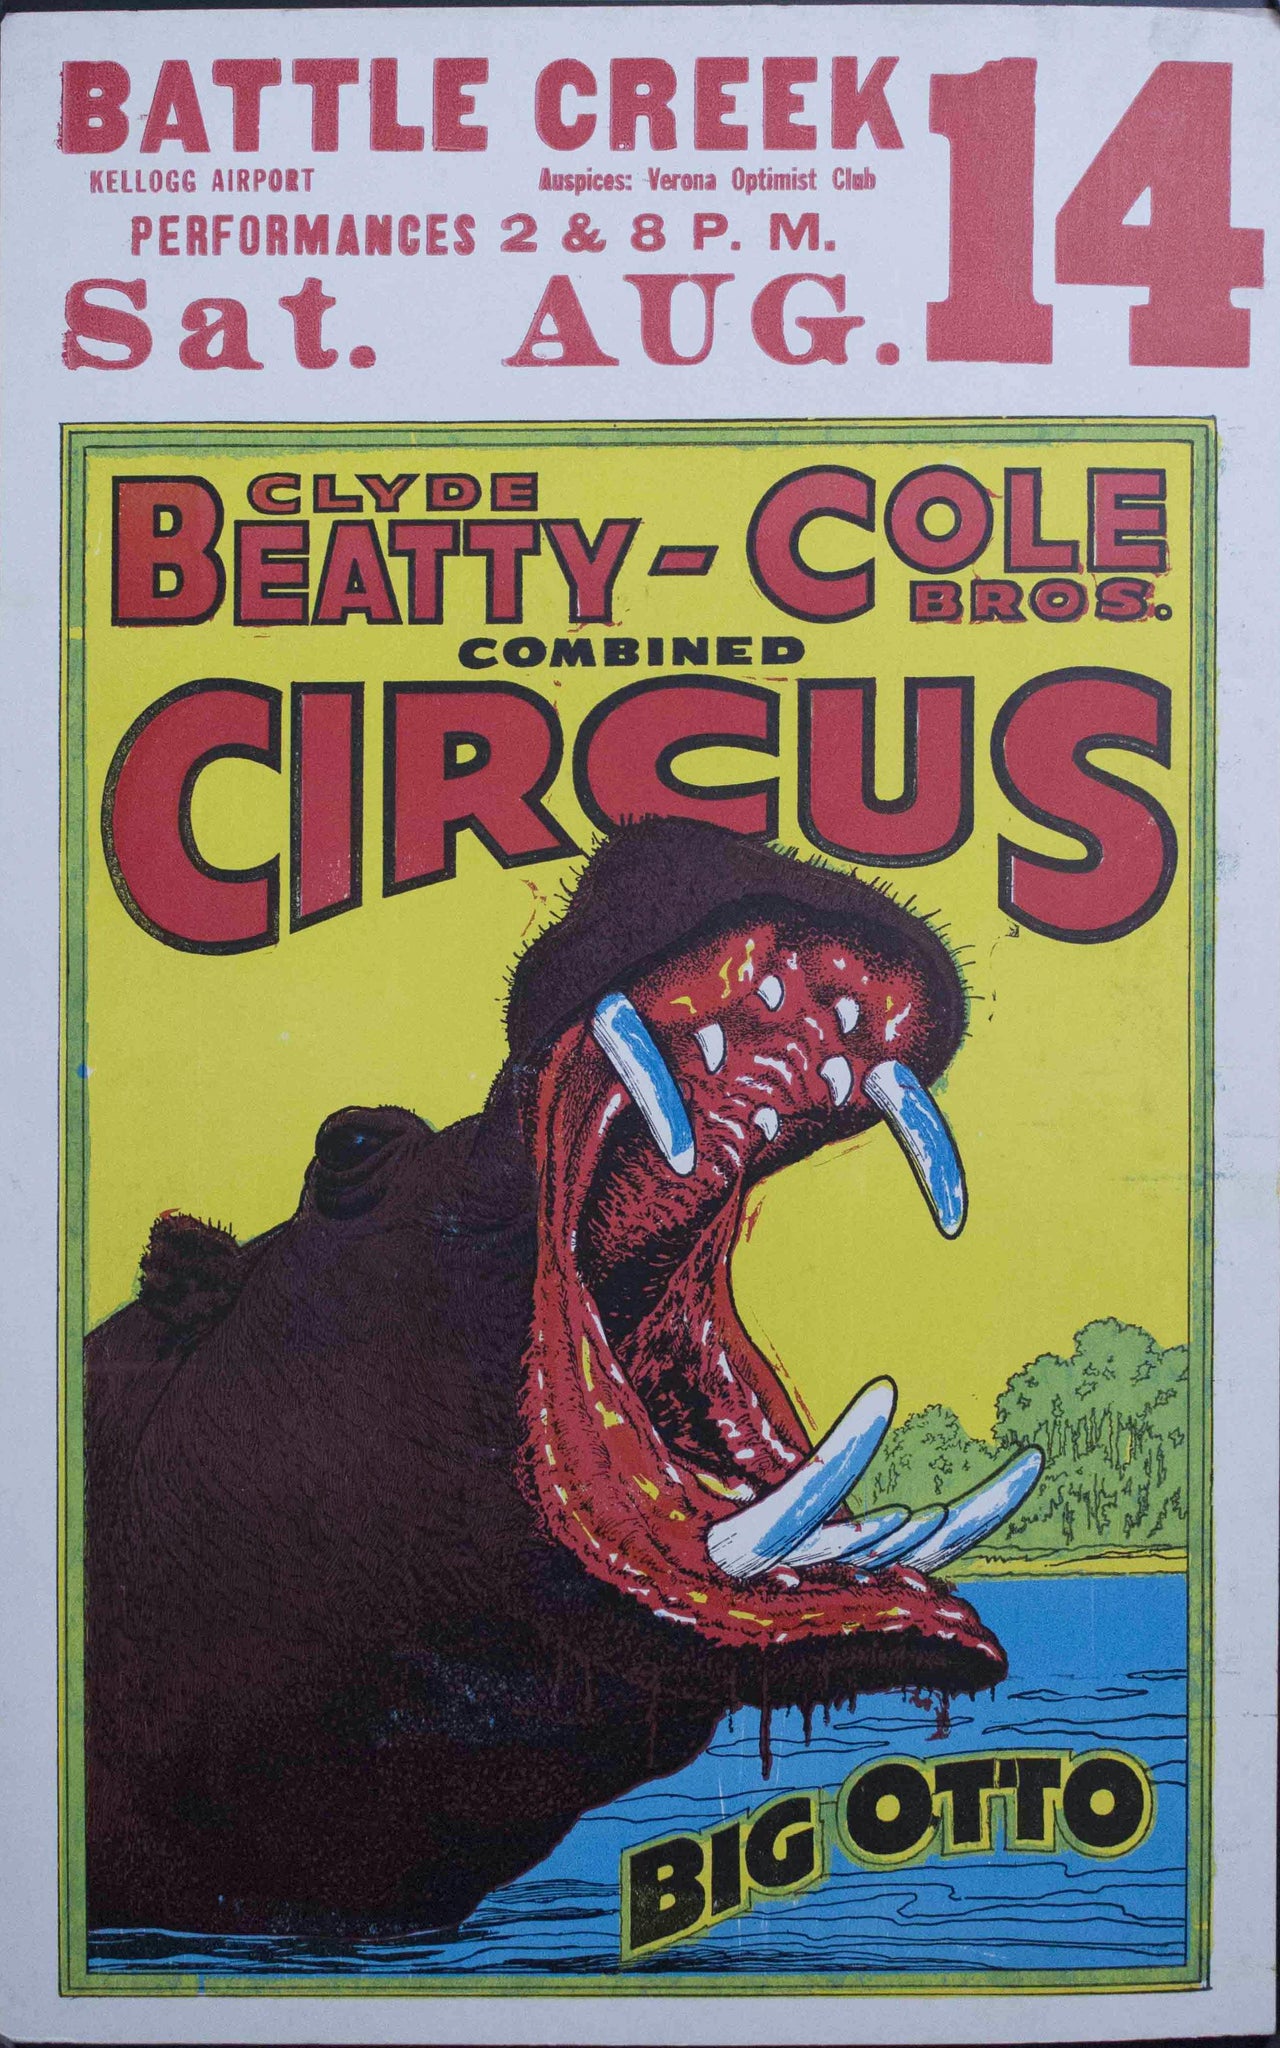 c. 1950 Clyde Beatty - Cole Bros Combined Circus | Big Otto | Battle Creek Kellogg Airport - Golden Age Posters